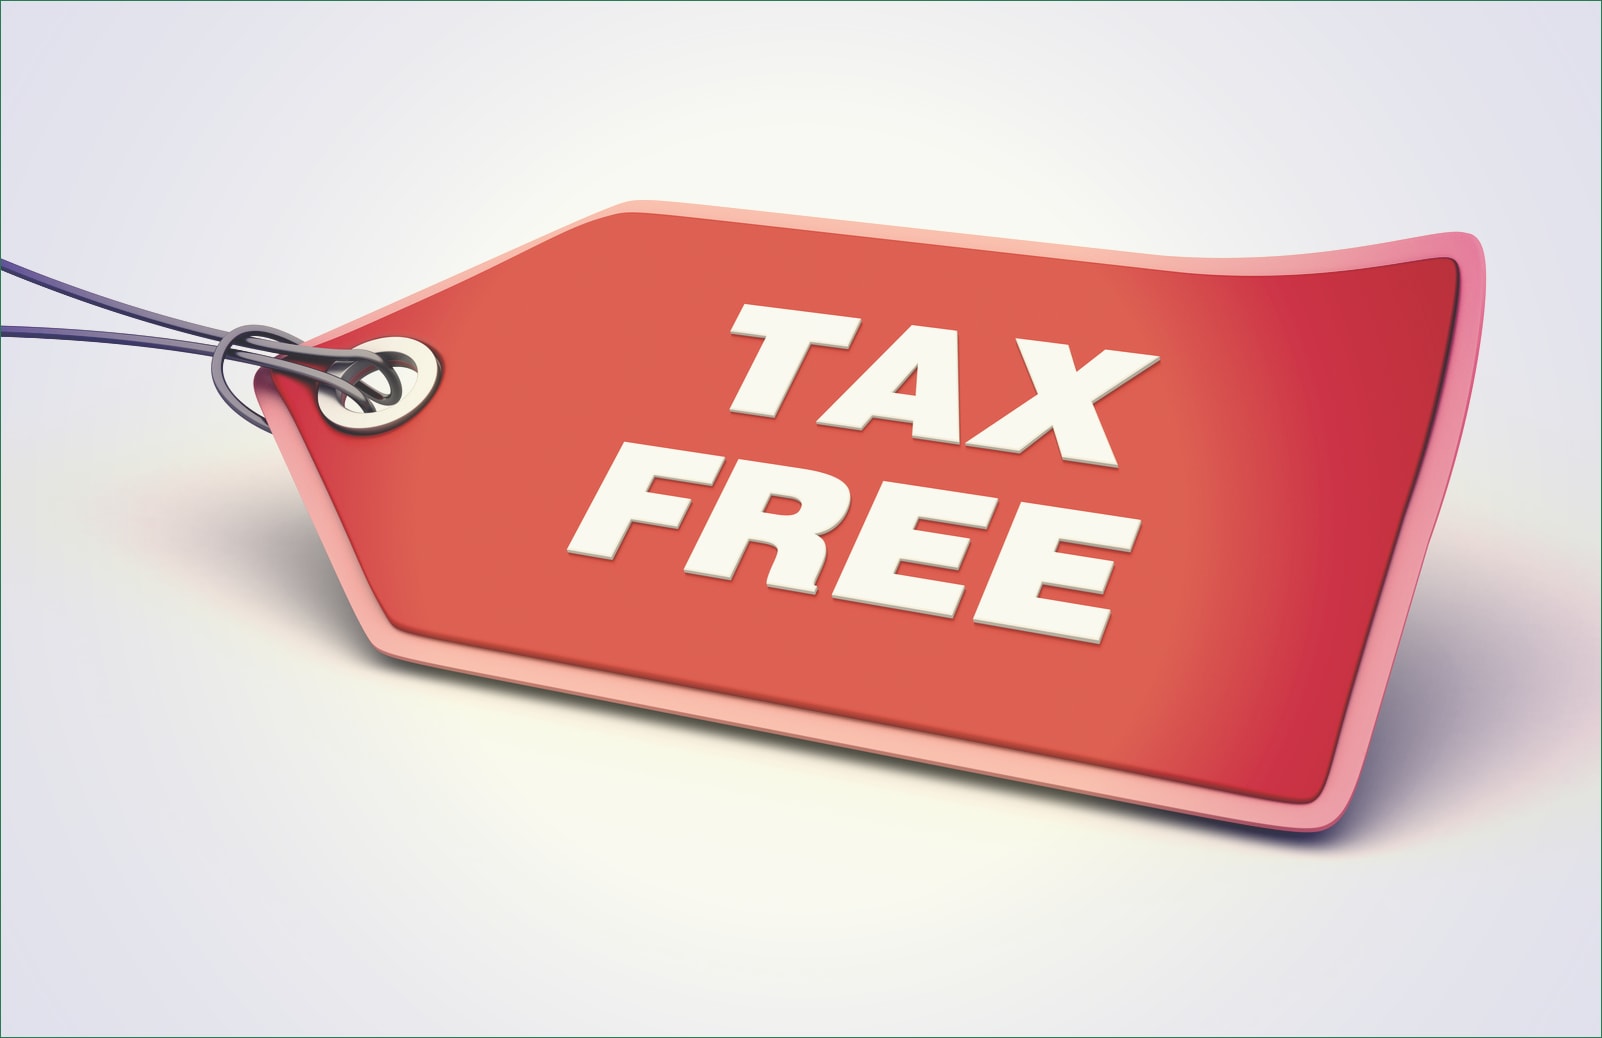 How to Use a Tax-Free Weekend Coupon Code?